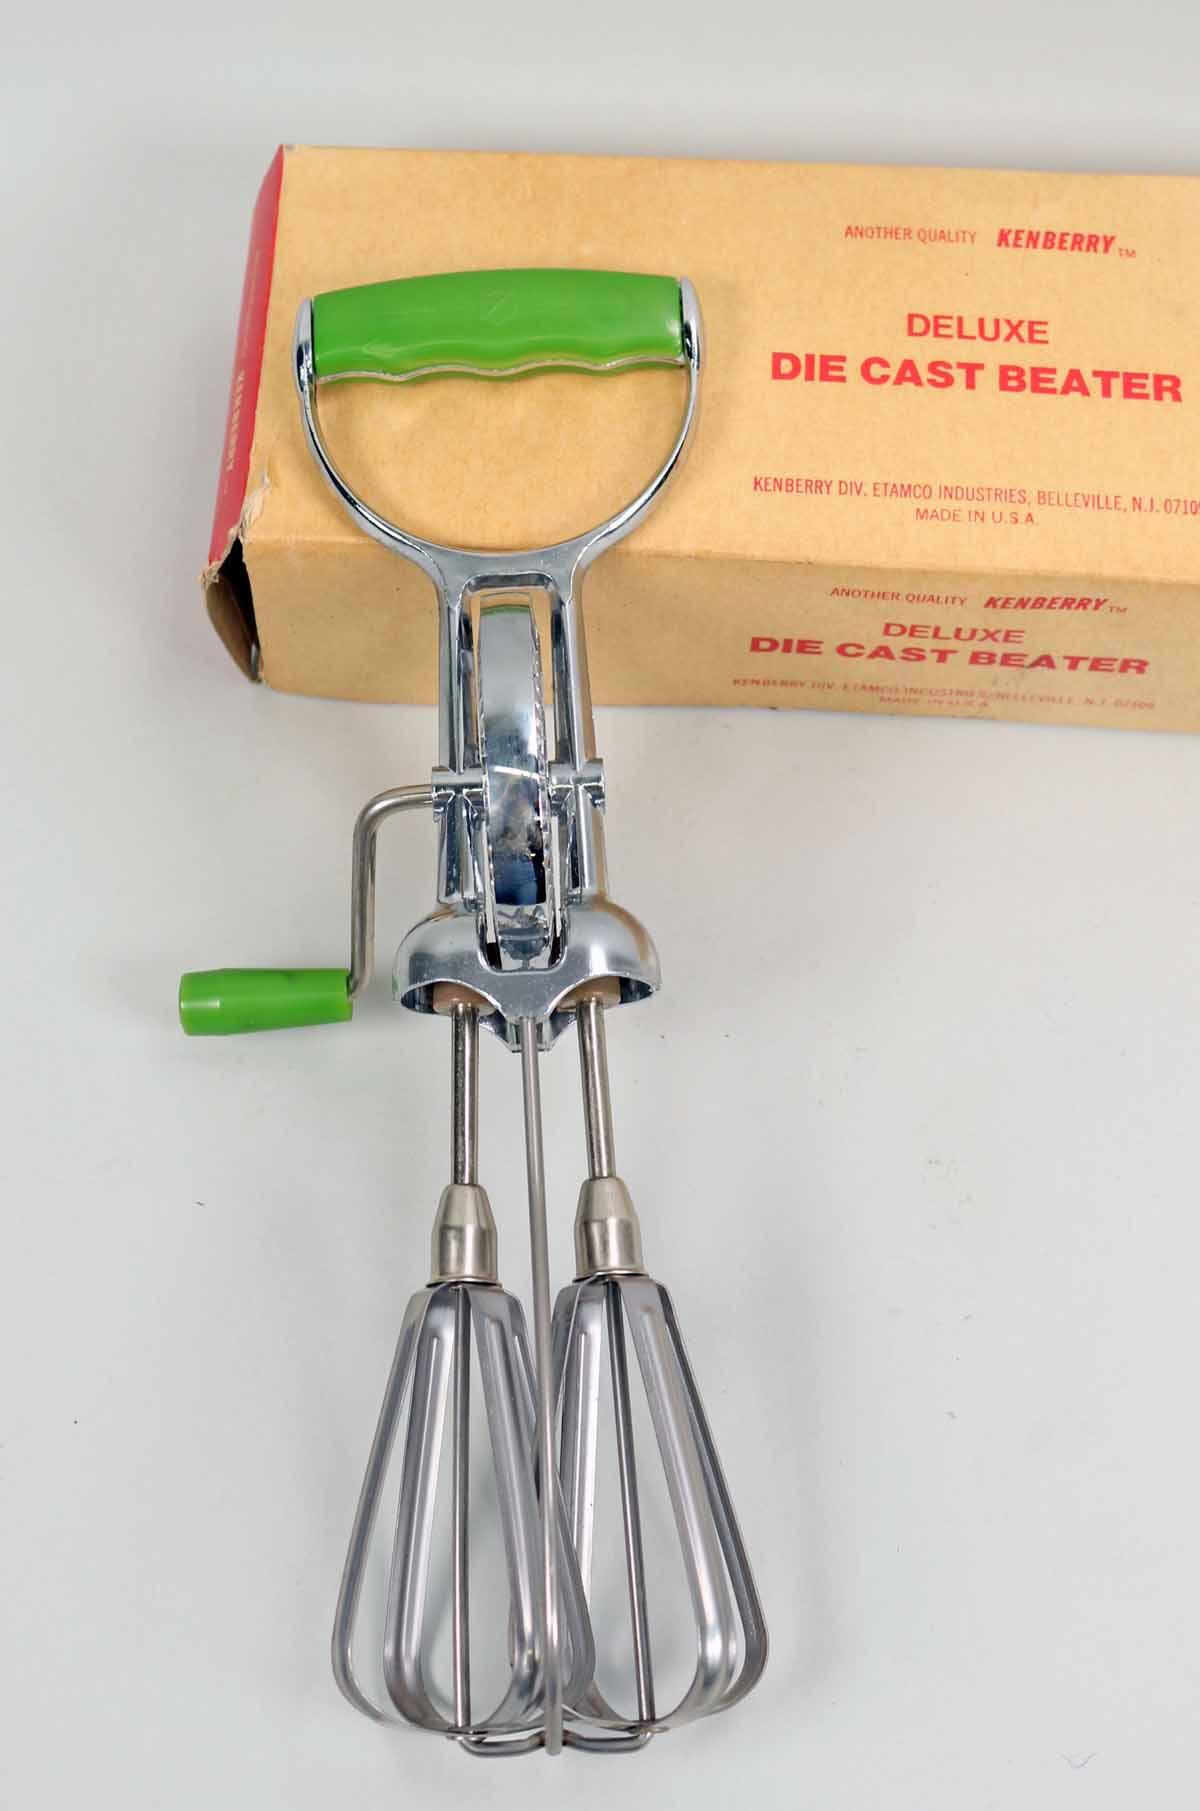 Egg Scale & "Deluxe" Die Cast Beater - Mixer